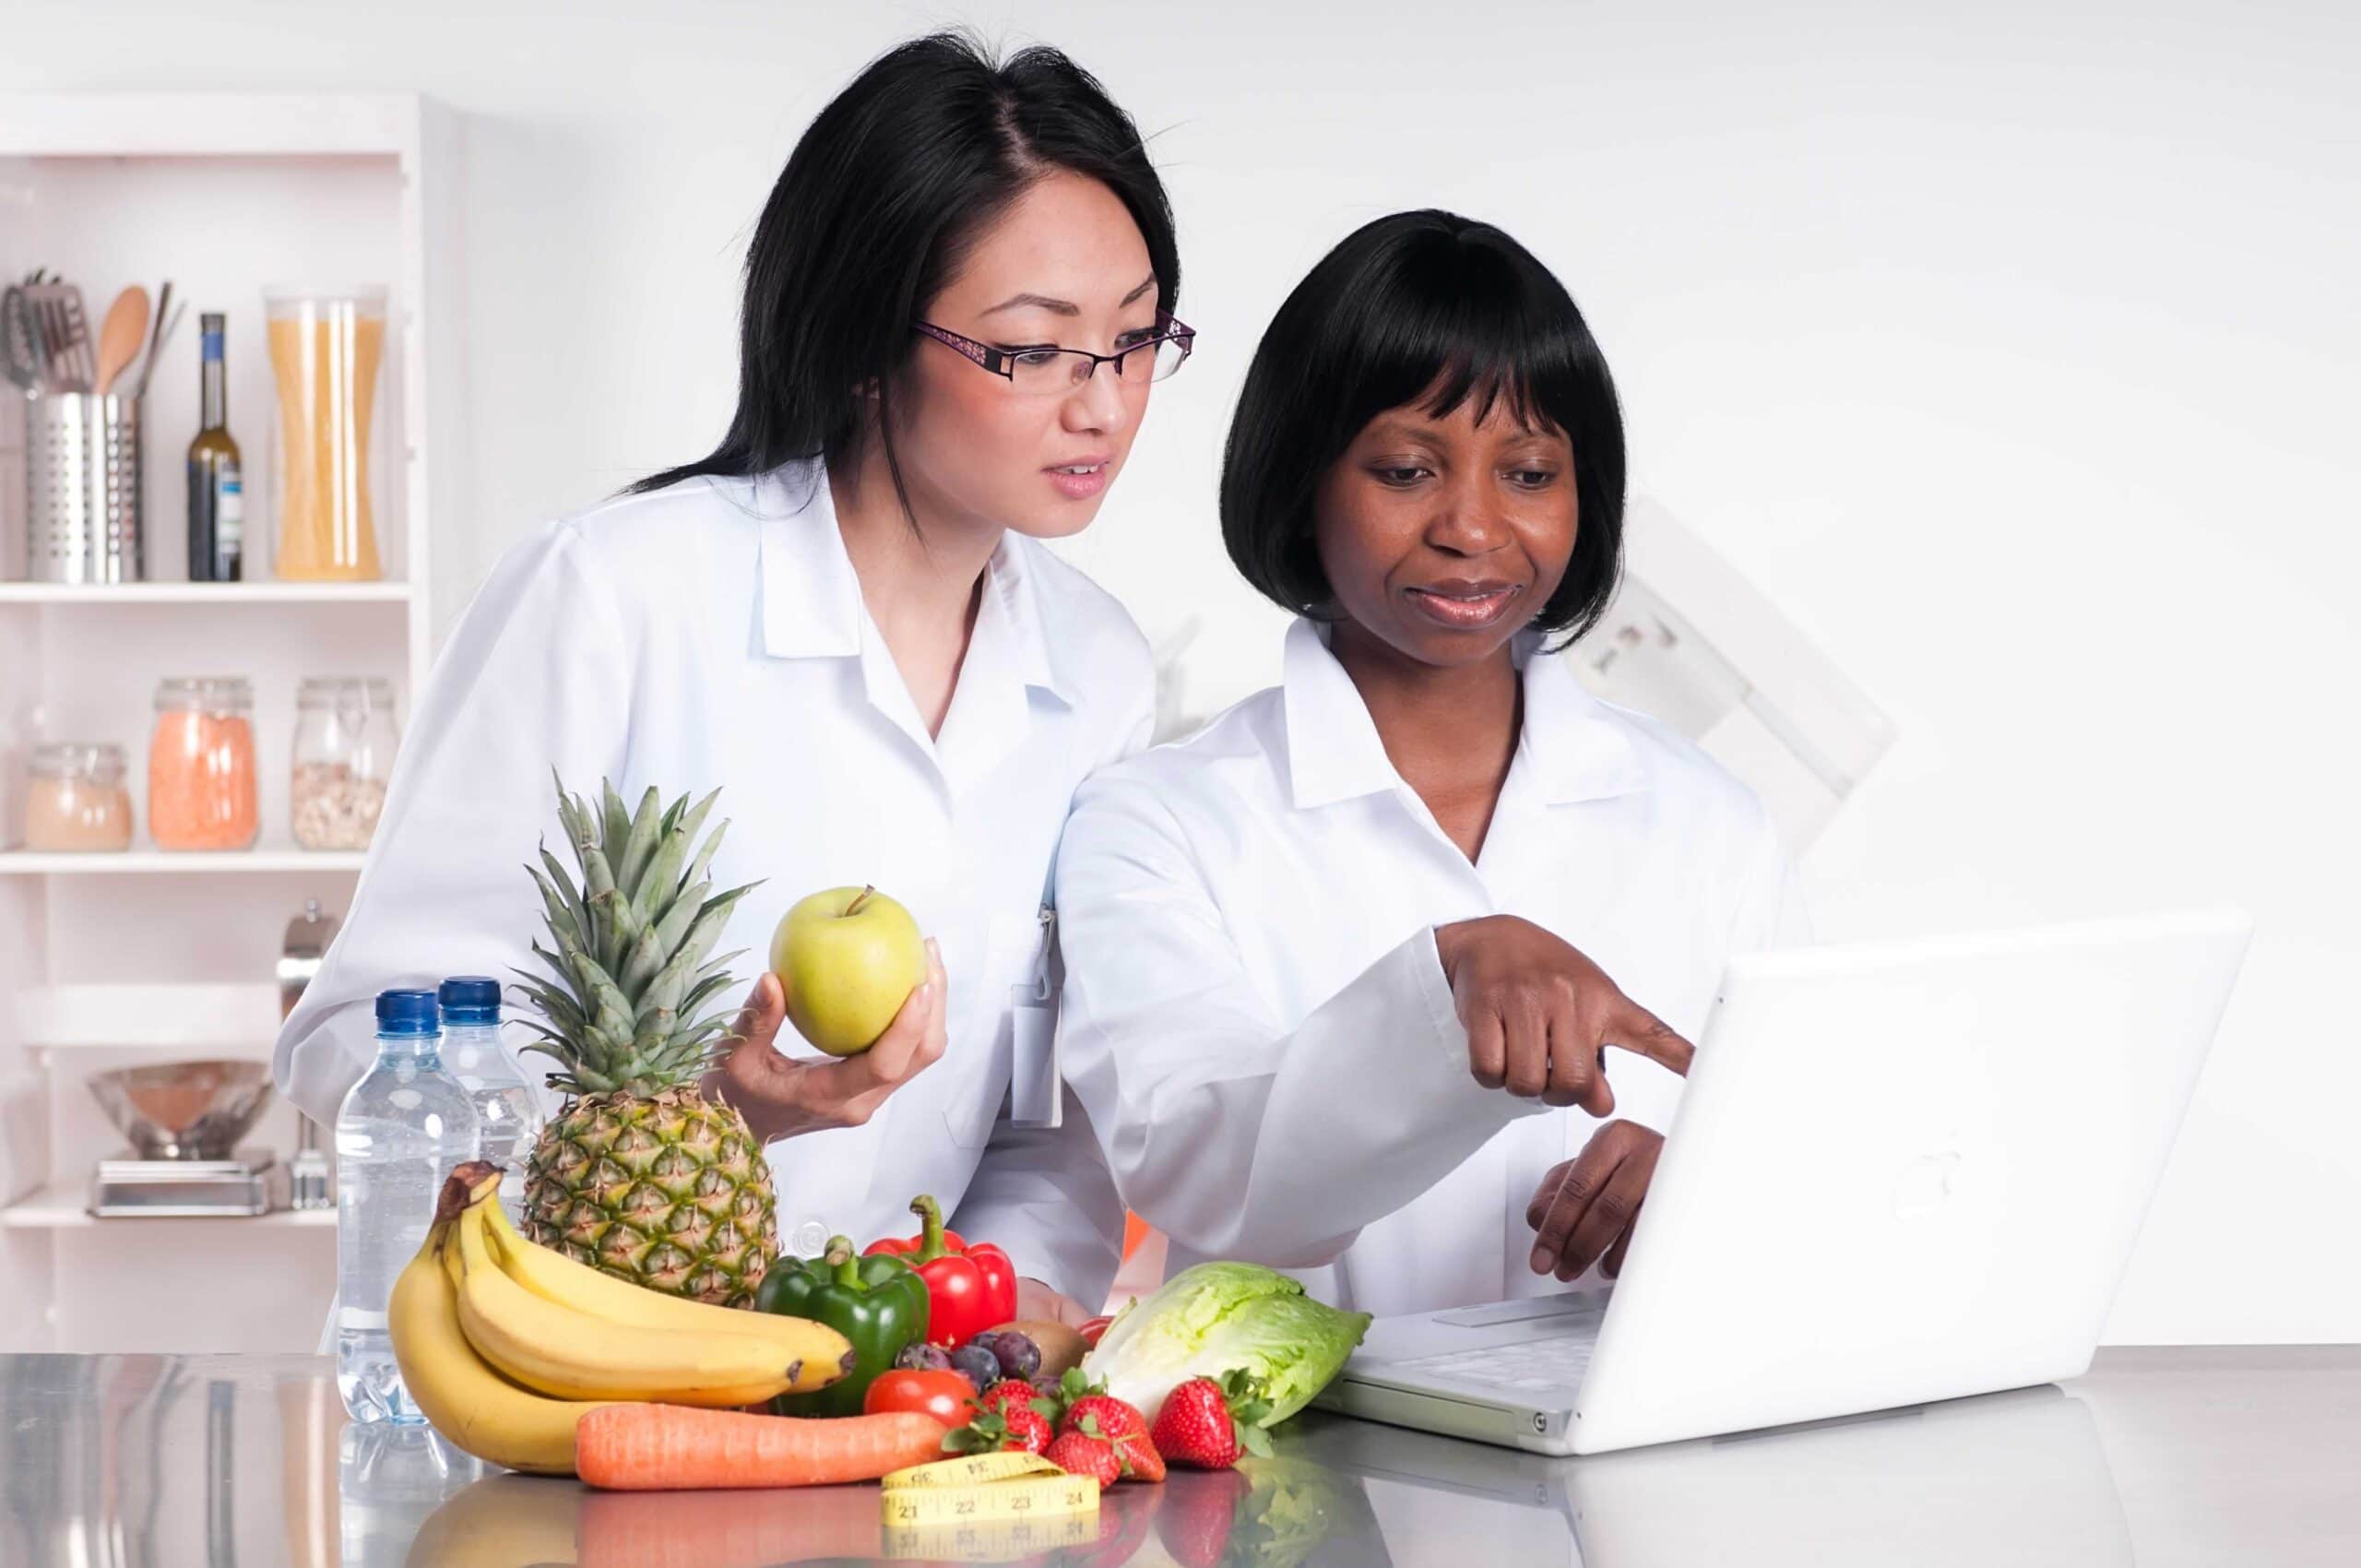 Dietitians discussing some information on a laptop with a pile of fruit and vegetables next to them.